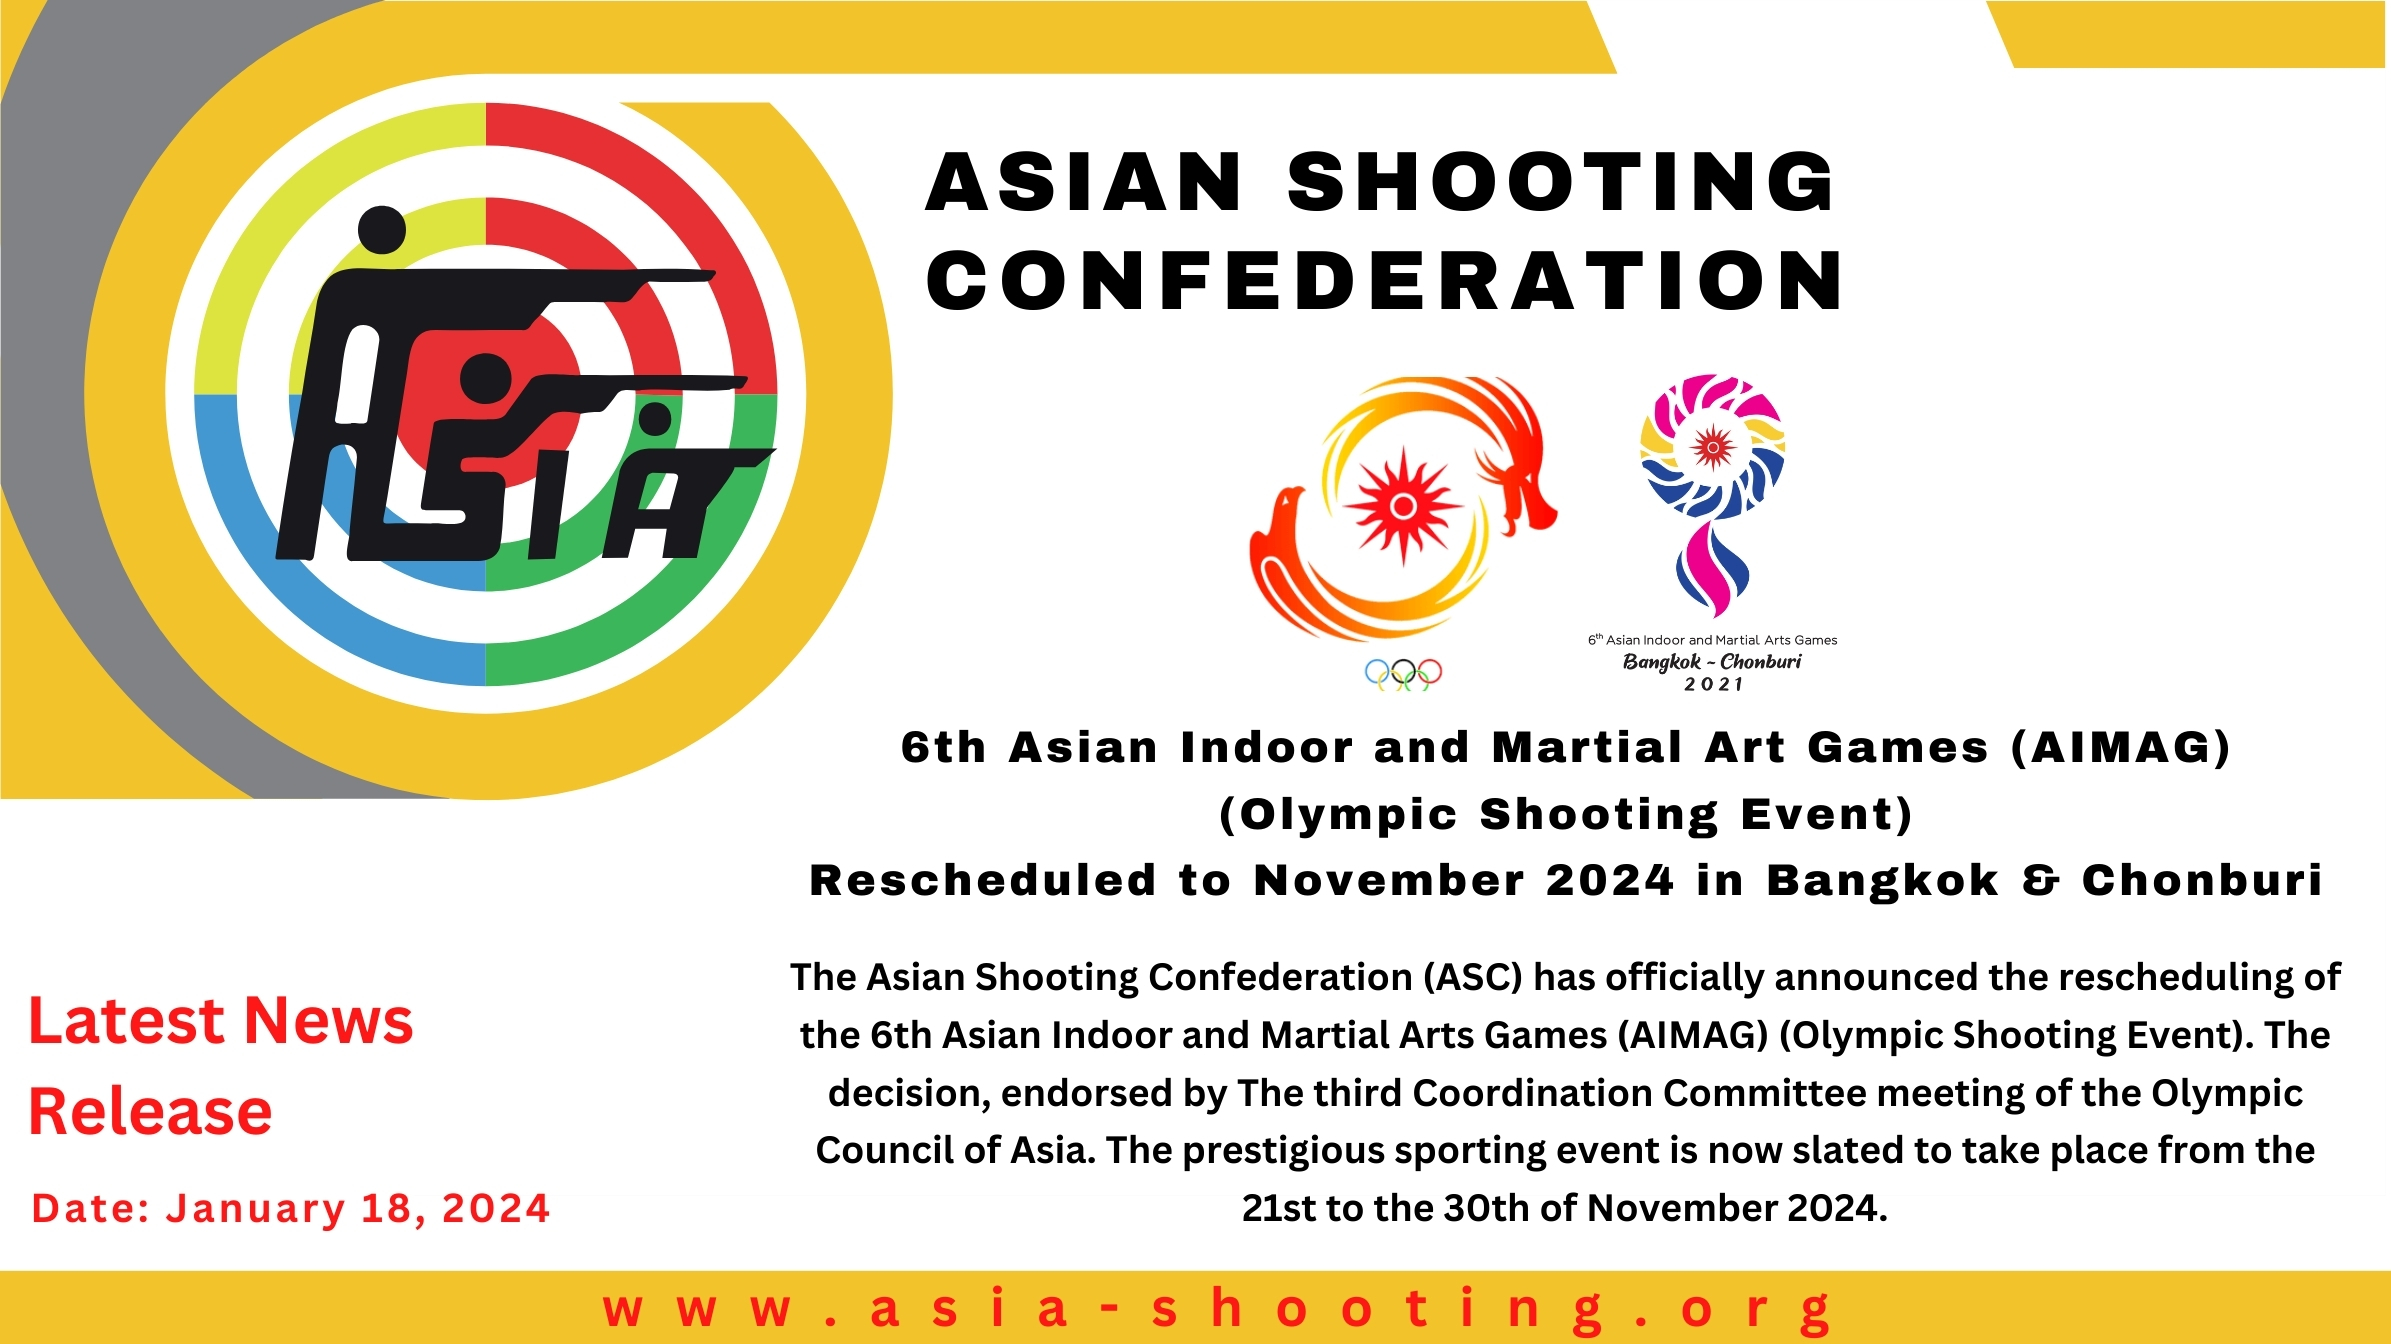 6th Asian Indoor and Martial Art Games (AIMAG) (Olympic Shooting Event